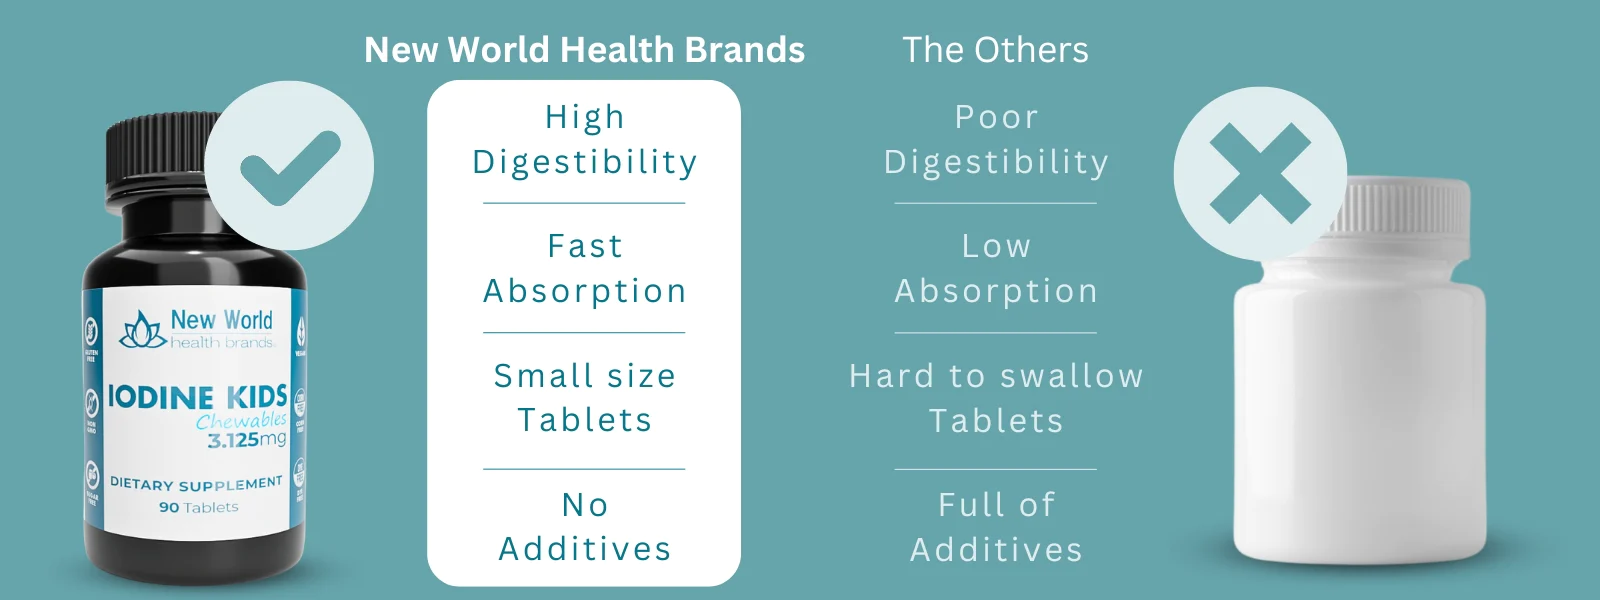 About New World Health Brands